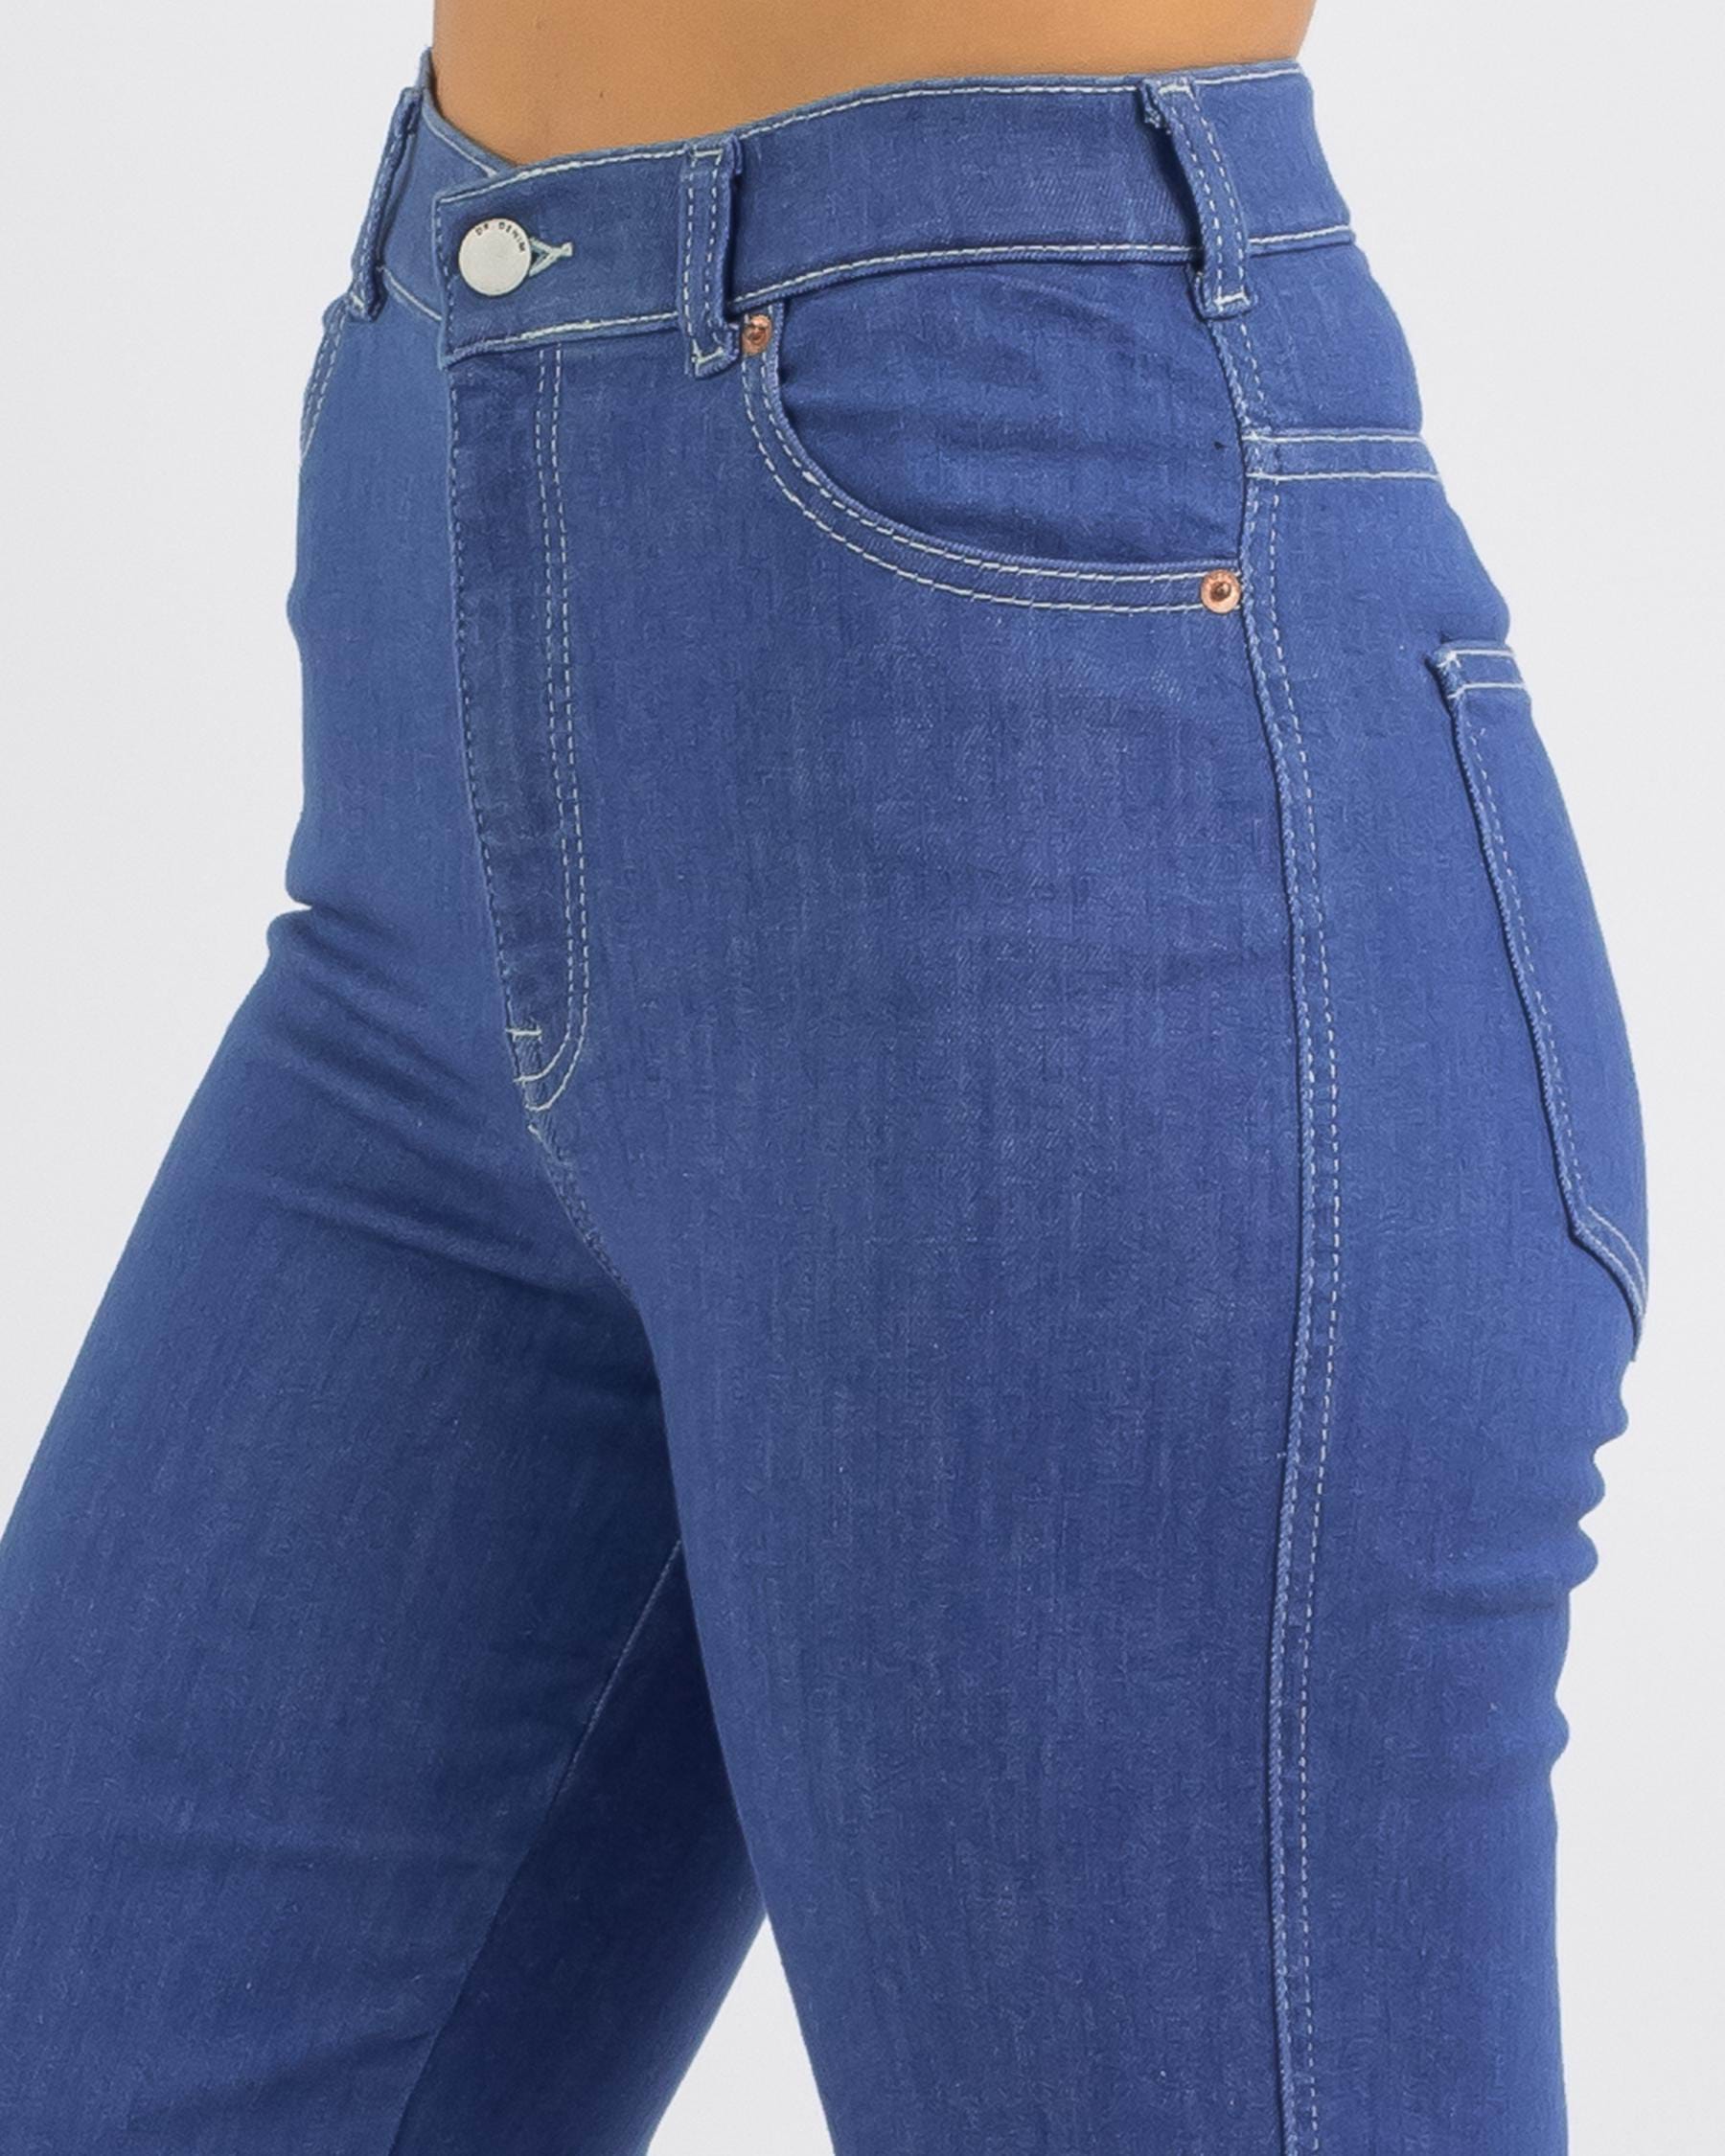 Dr Denim Moxy Straight Jeans In Less Blue Rinse - Fast Shipping & Easy ...